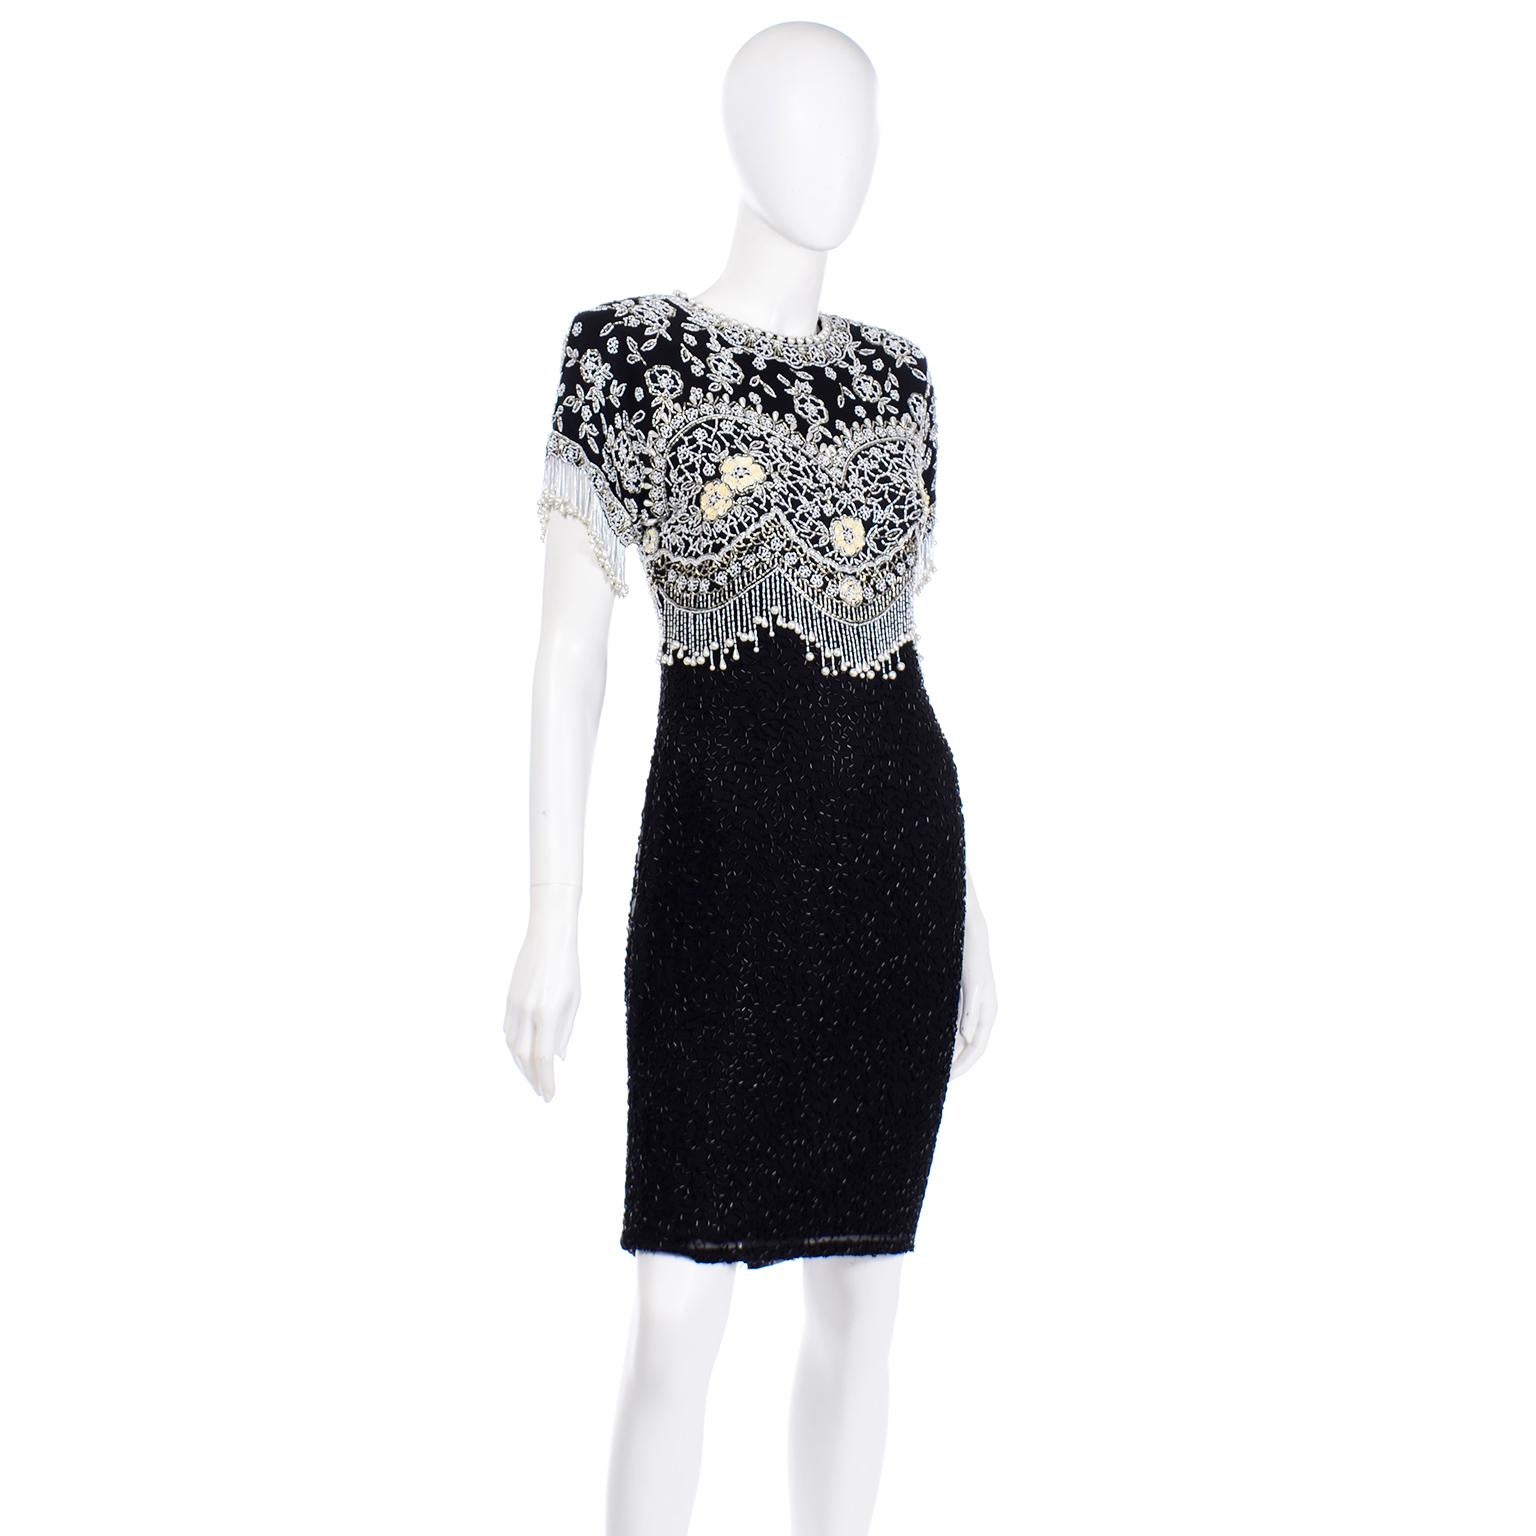 black dress with white beads